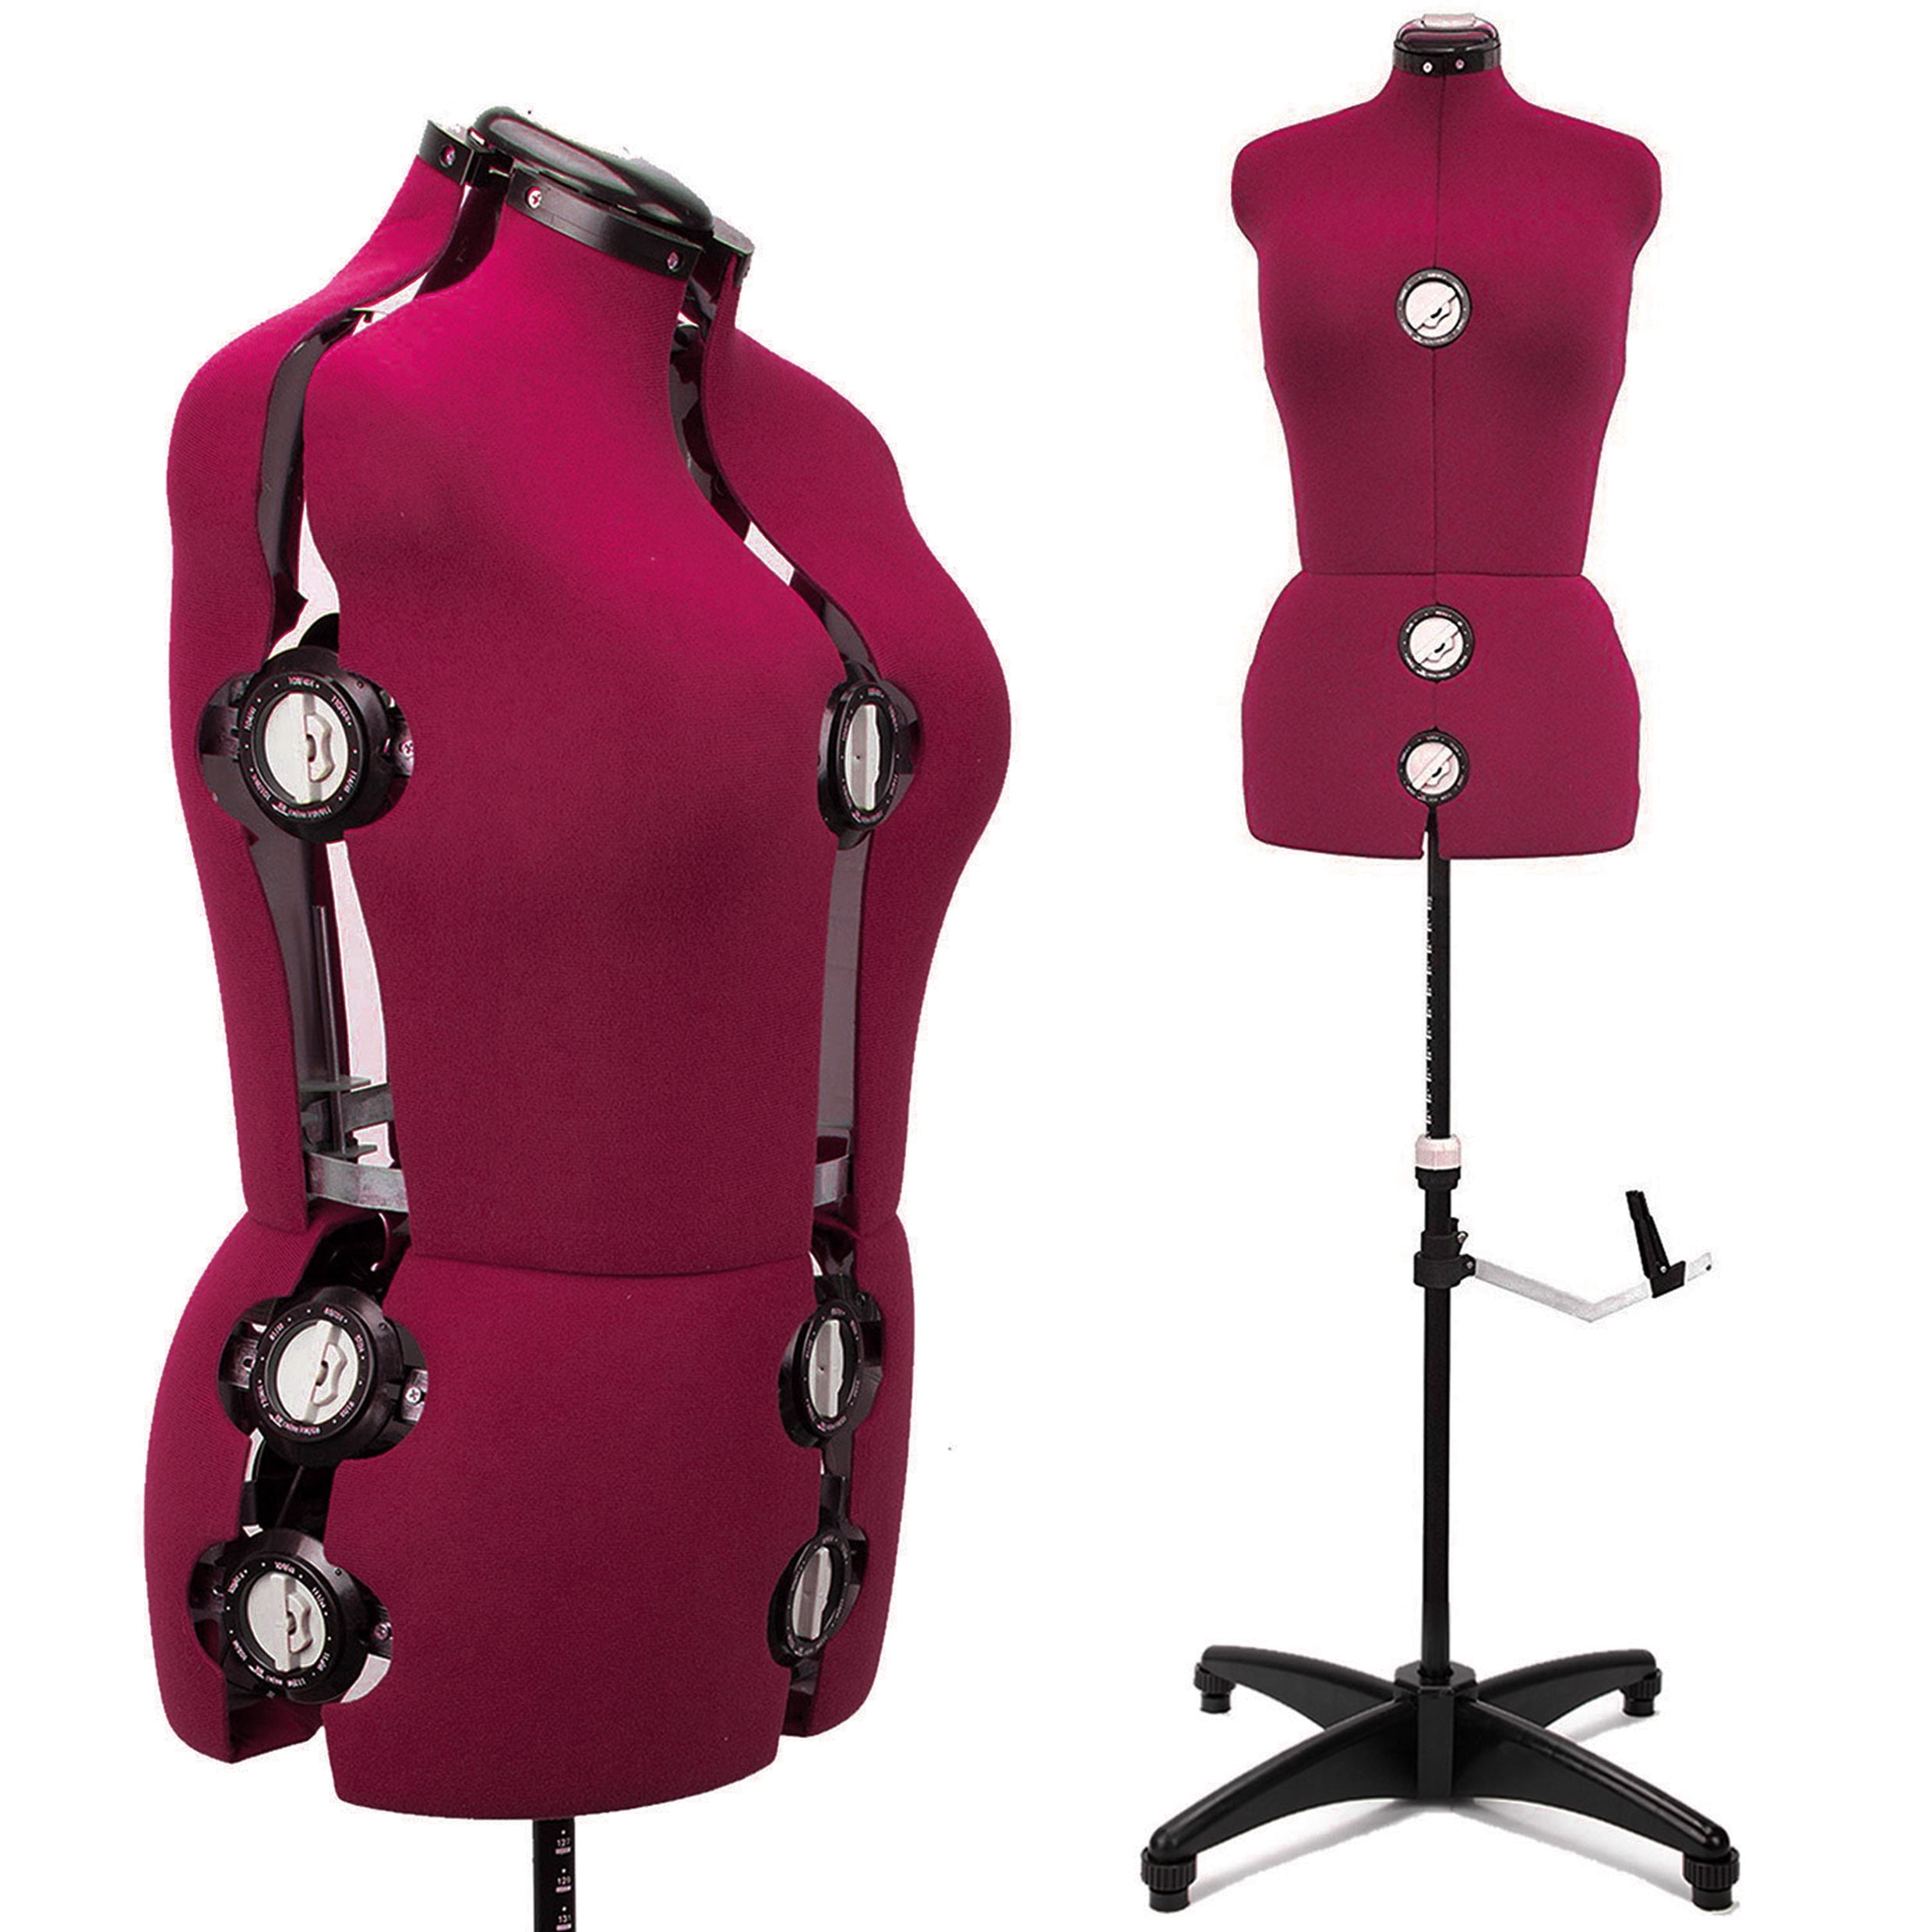 GEX Burgundy Female Fabric Adjustable Mannequin Dress Form for Sewing ...